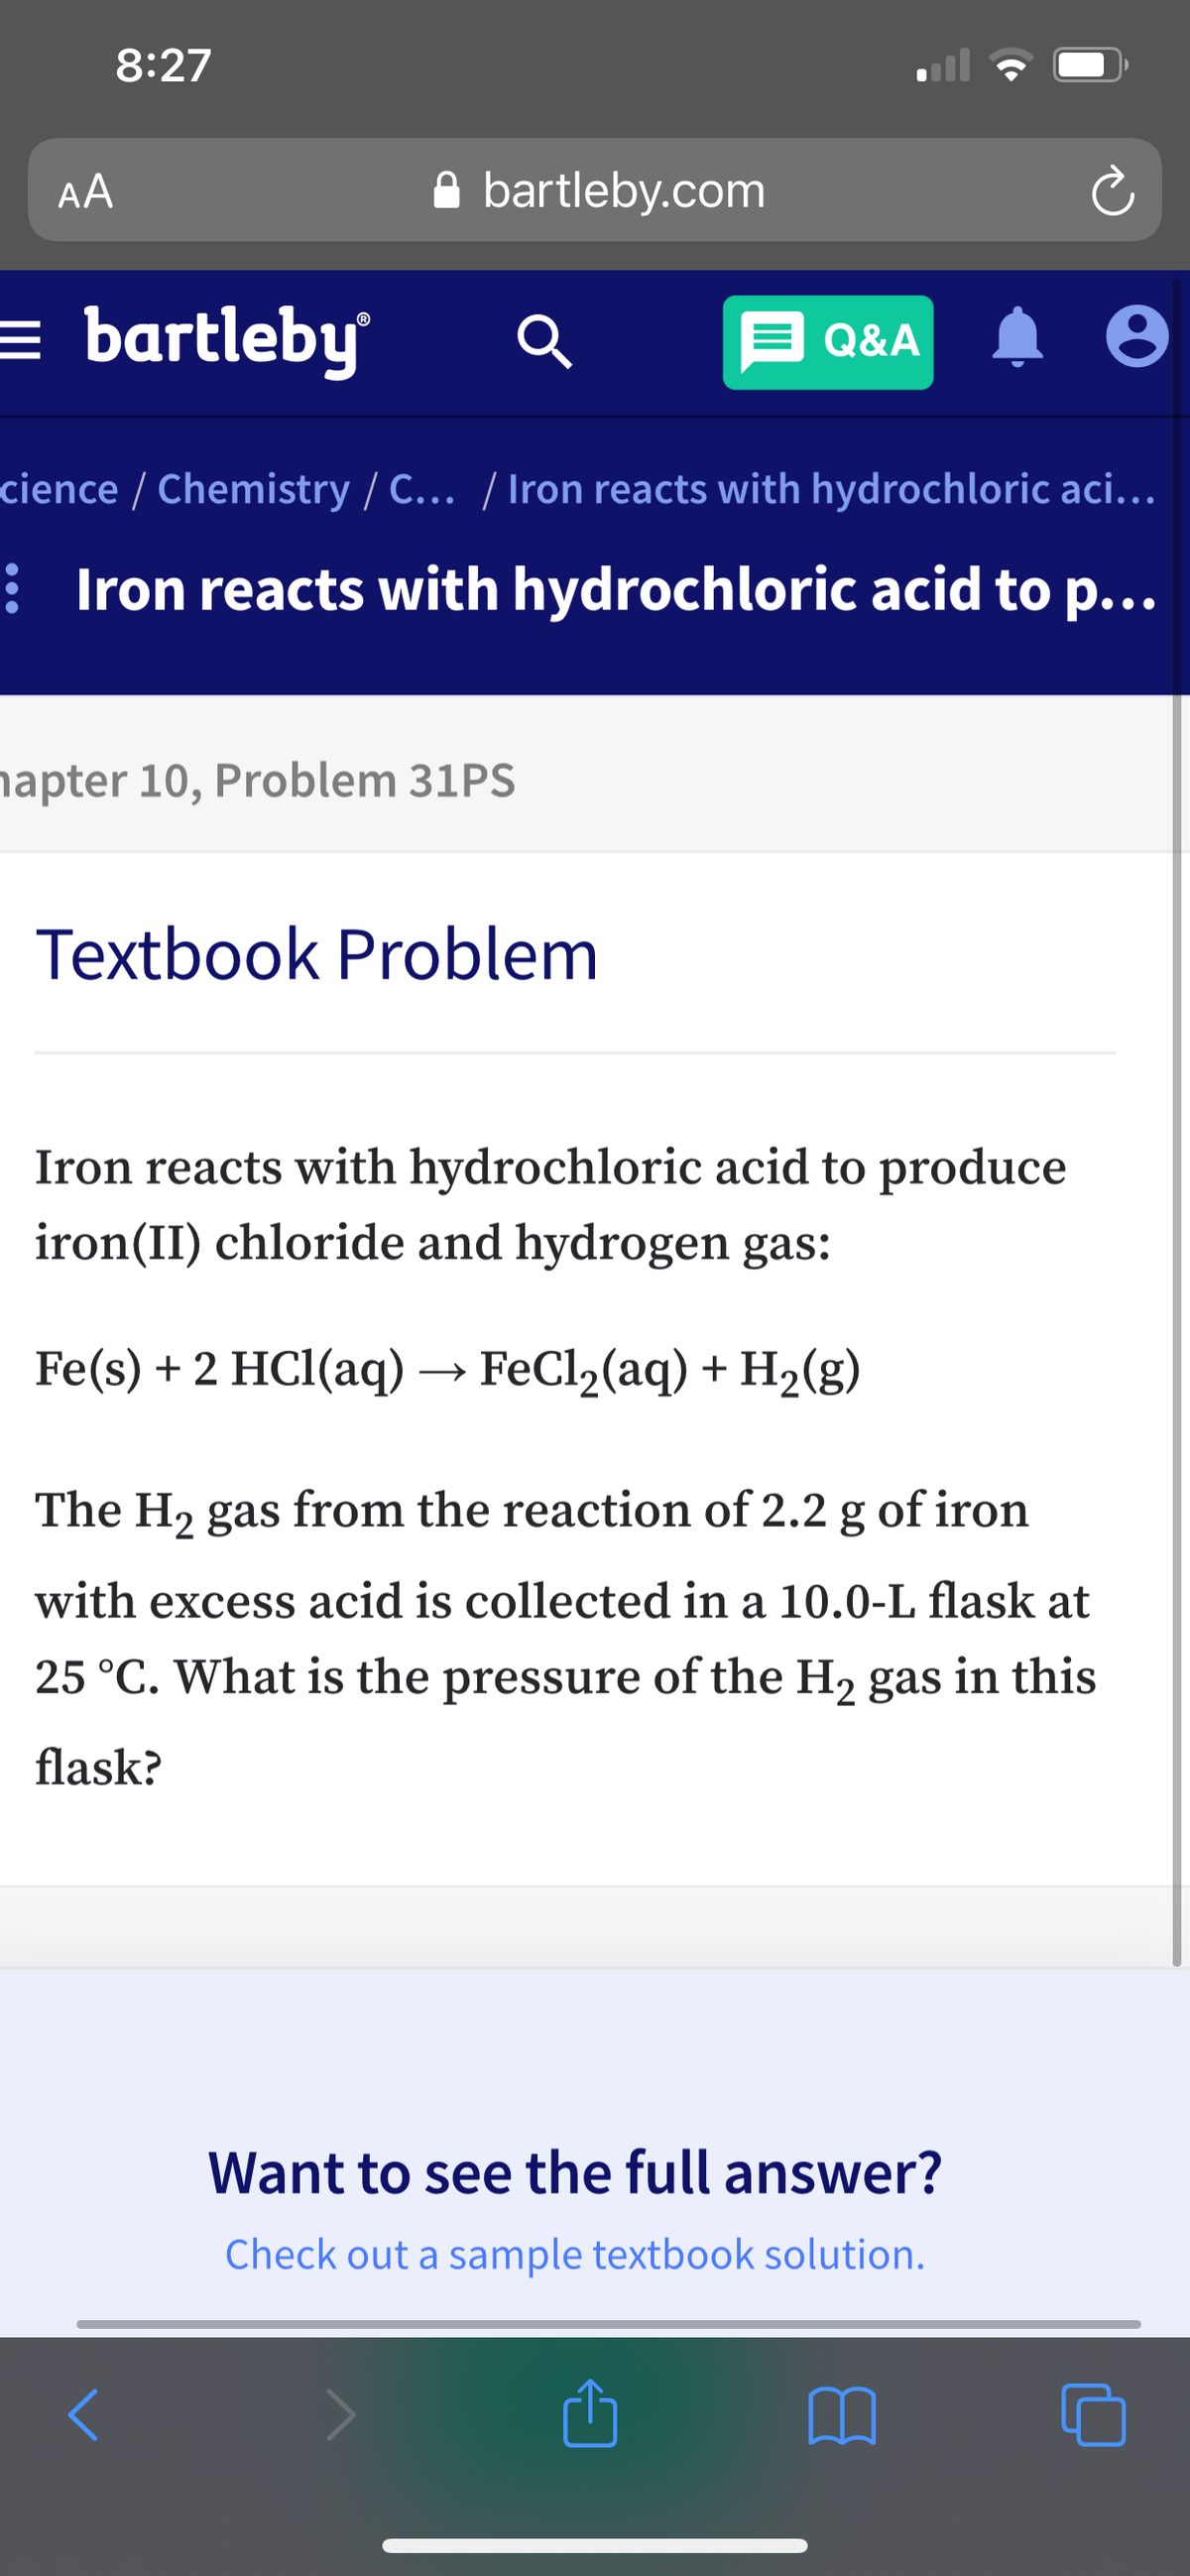 8:27
AA
A bartleby.com
= bartleby
E Q&A
cience / Chemistry / C... / Iron reacts with hydrochloric aci...
: Iron reacts with hydrochloric acid to p...
napter 10, Problem 31PS
Textbook Problem
Iron reacts with hydrochloric acid to produce
iron(II) chloride and hydrogen gas:
Fe(s) + 2 HCl(aq) → FeCl2(aq) + H2(g)
The H2 gas from the reaction of 2.2 g of iron
with excess acid is collected in a 10.0-L flask at
25 °C. What is the pressure of the H2 gas in this
flask?
Want to see the full answer?
Check out a sample textbook solution.
